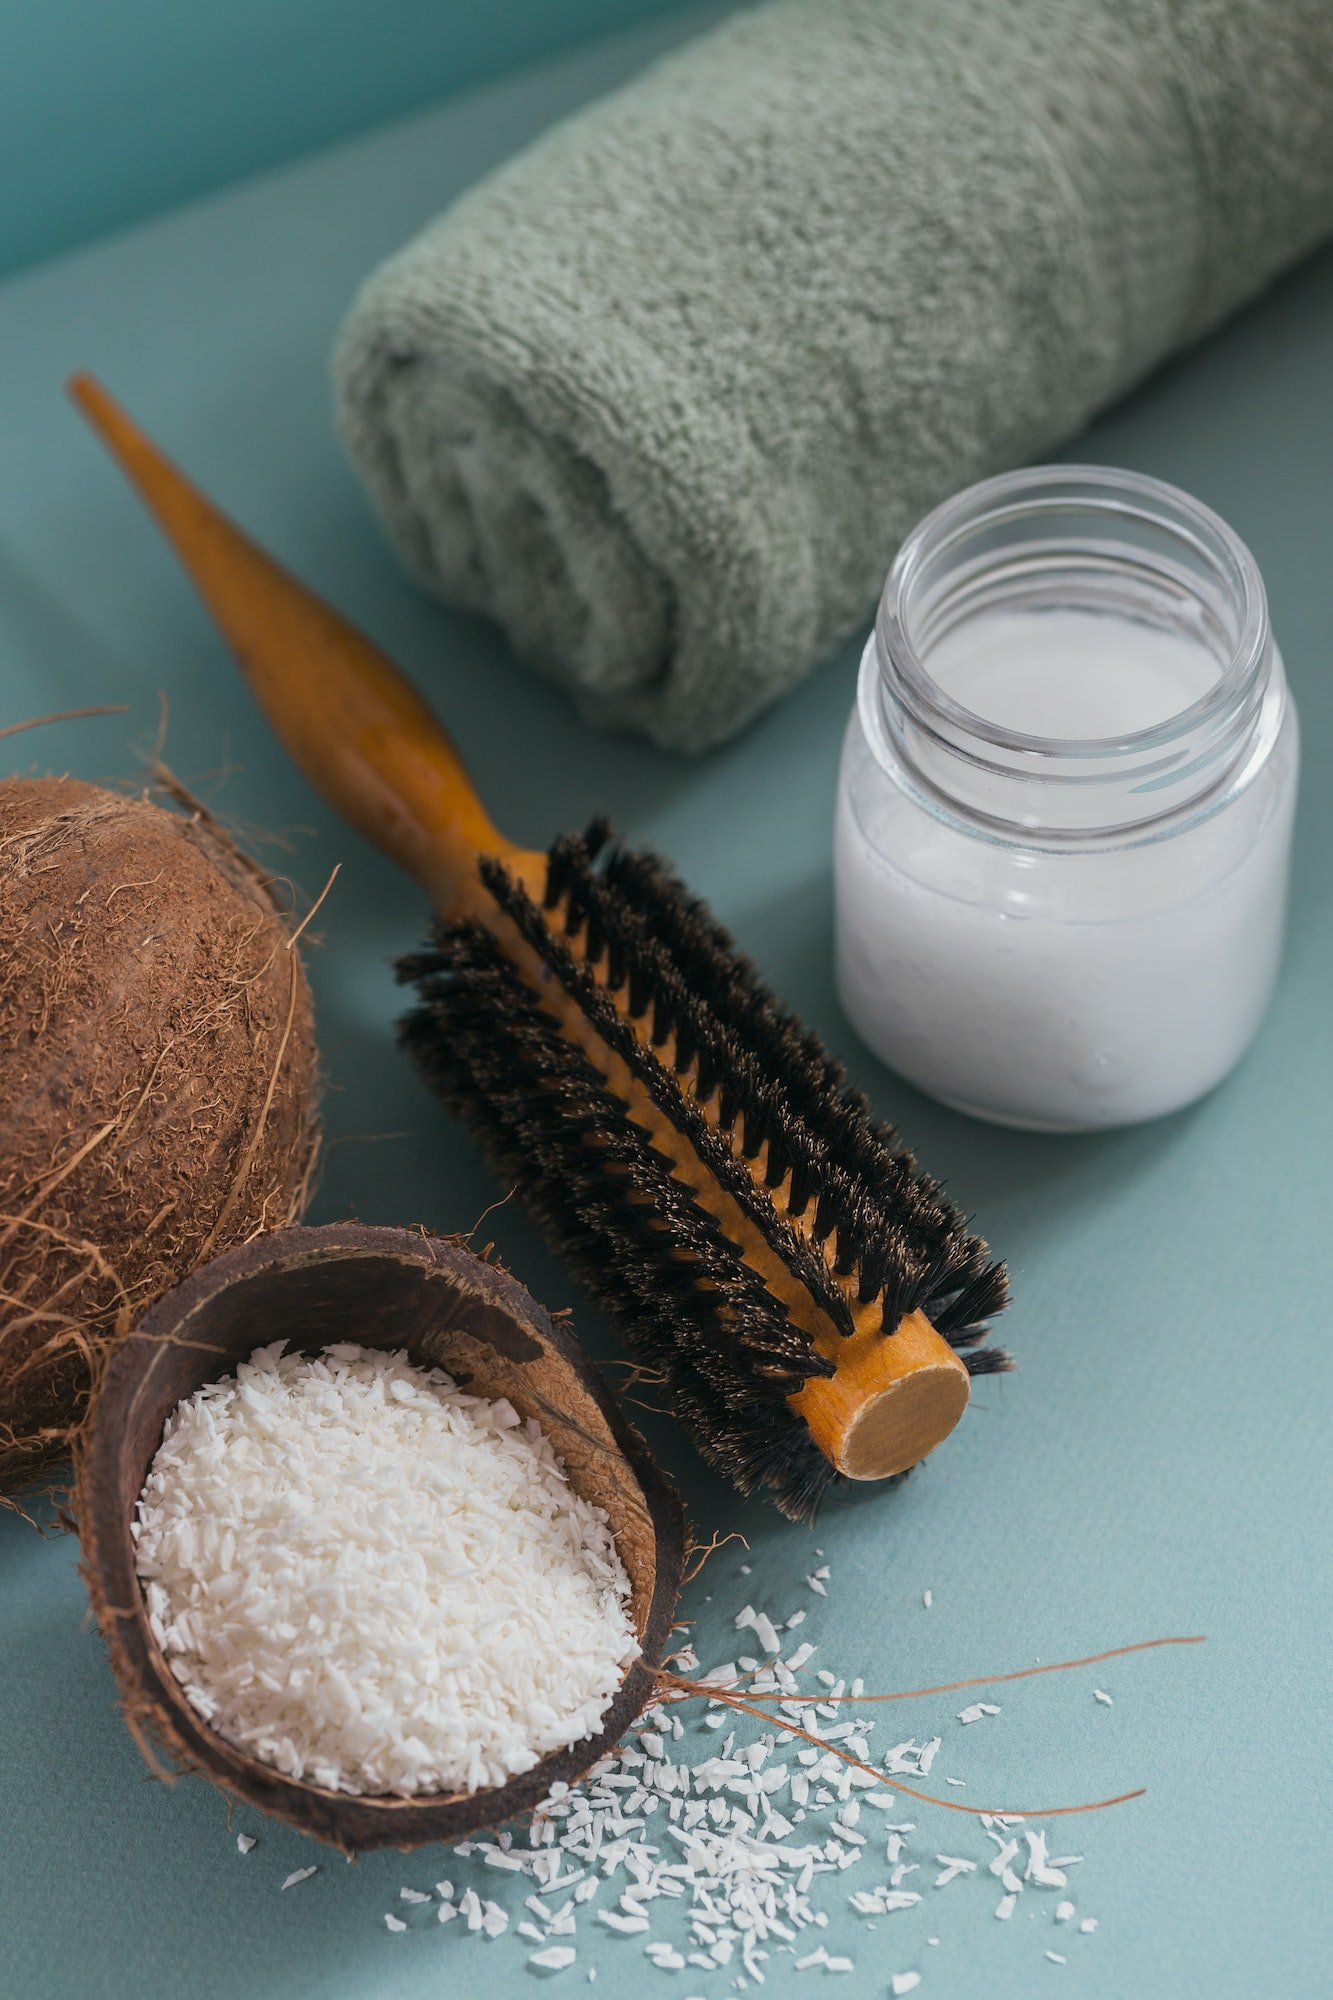 Coconut oil in a bottle with coconuts, towel and hairbrush